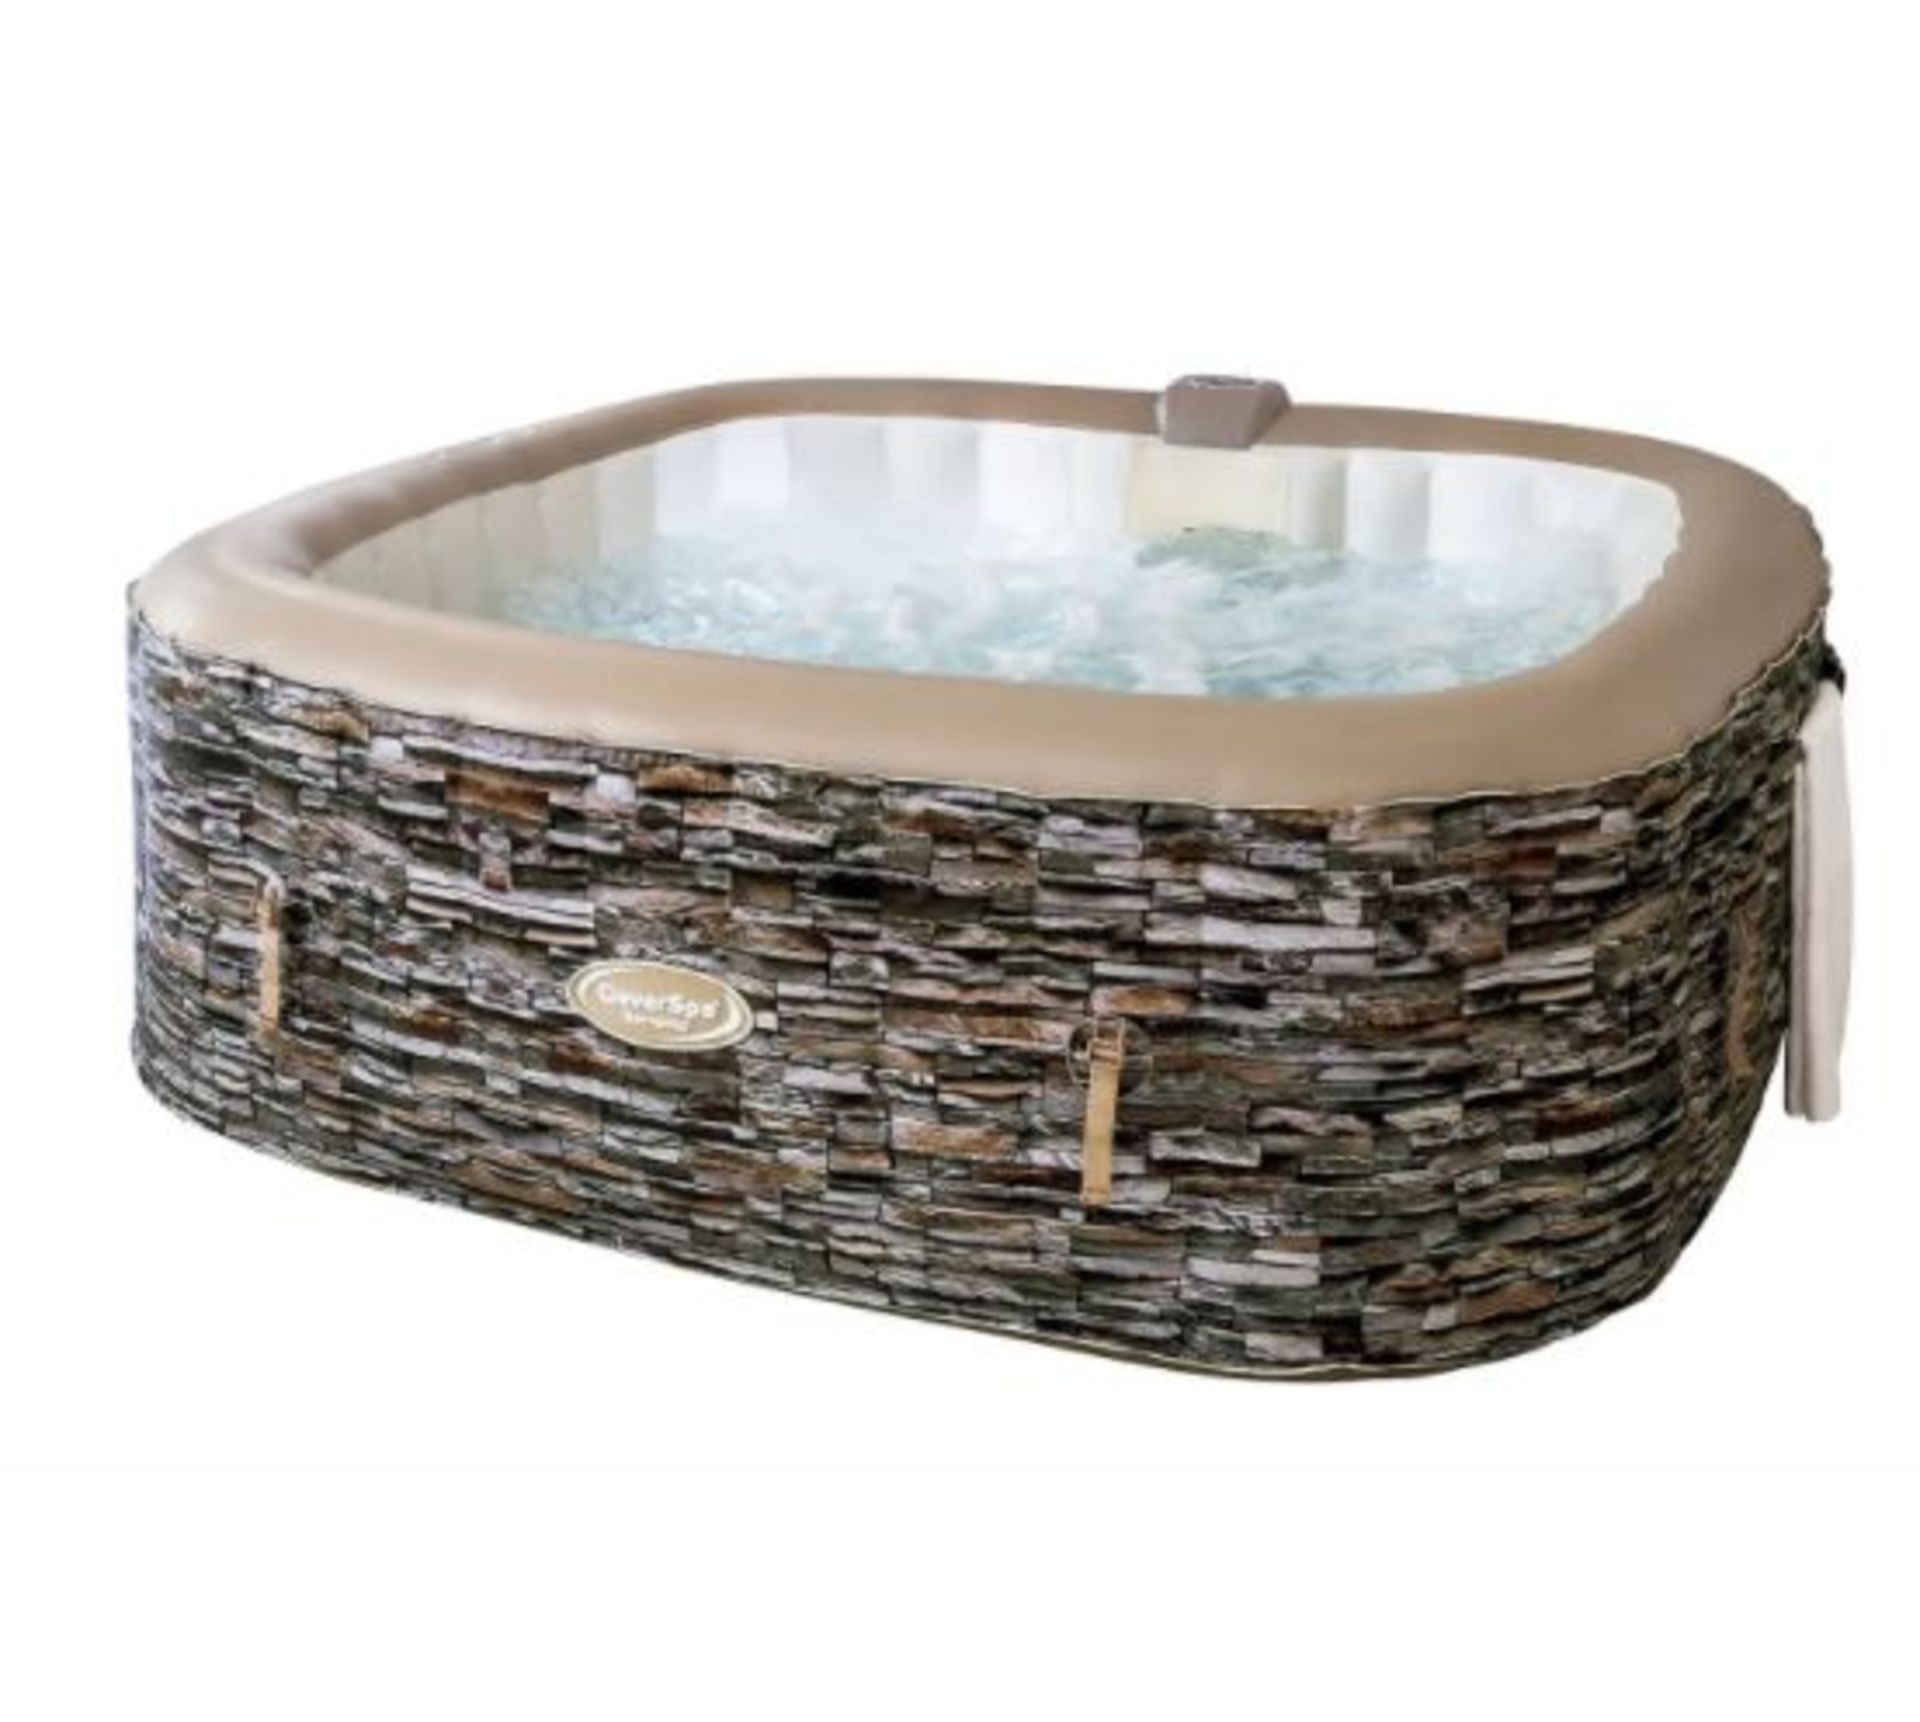 (R7B) 1x CleverSpa Sorrento 6 Person Hot Tub RRP £600. - Image 3 of 7